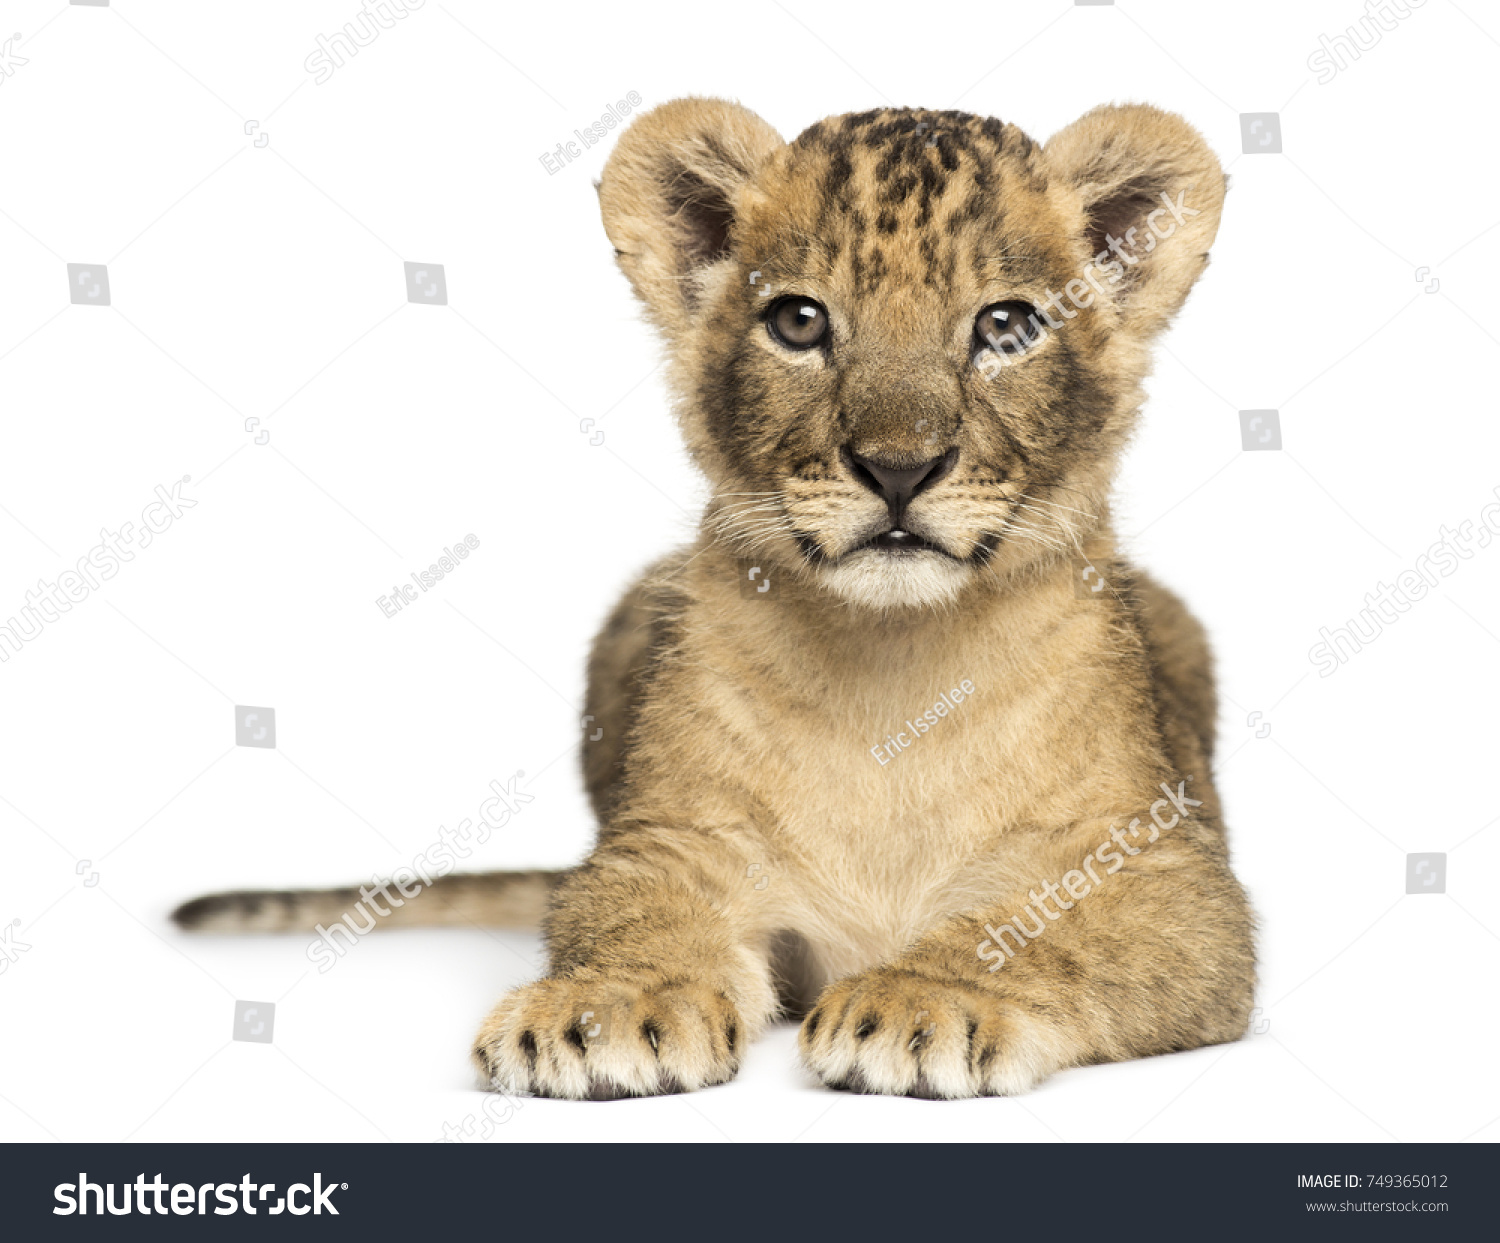 Lion cub lying, looking at the camera, 7 weeks old, isolated on white #749365012